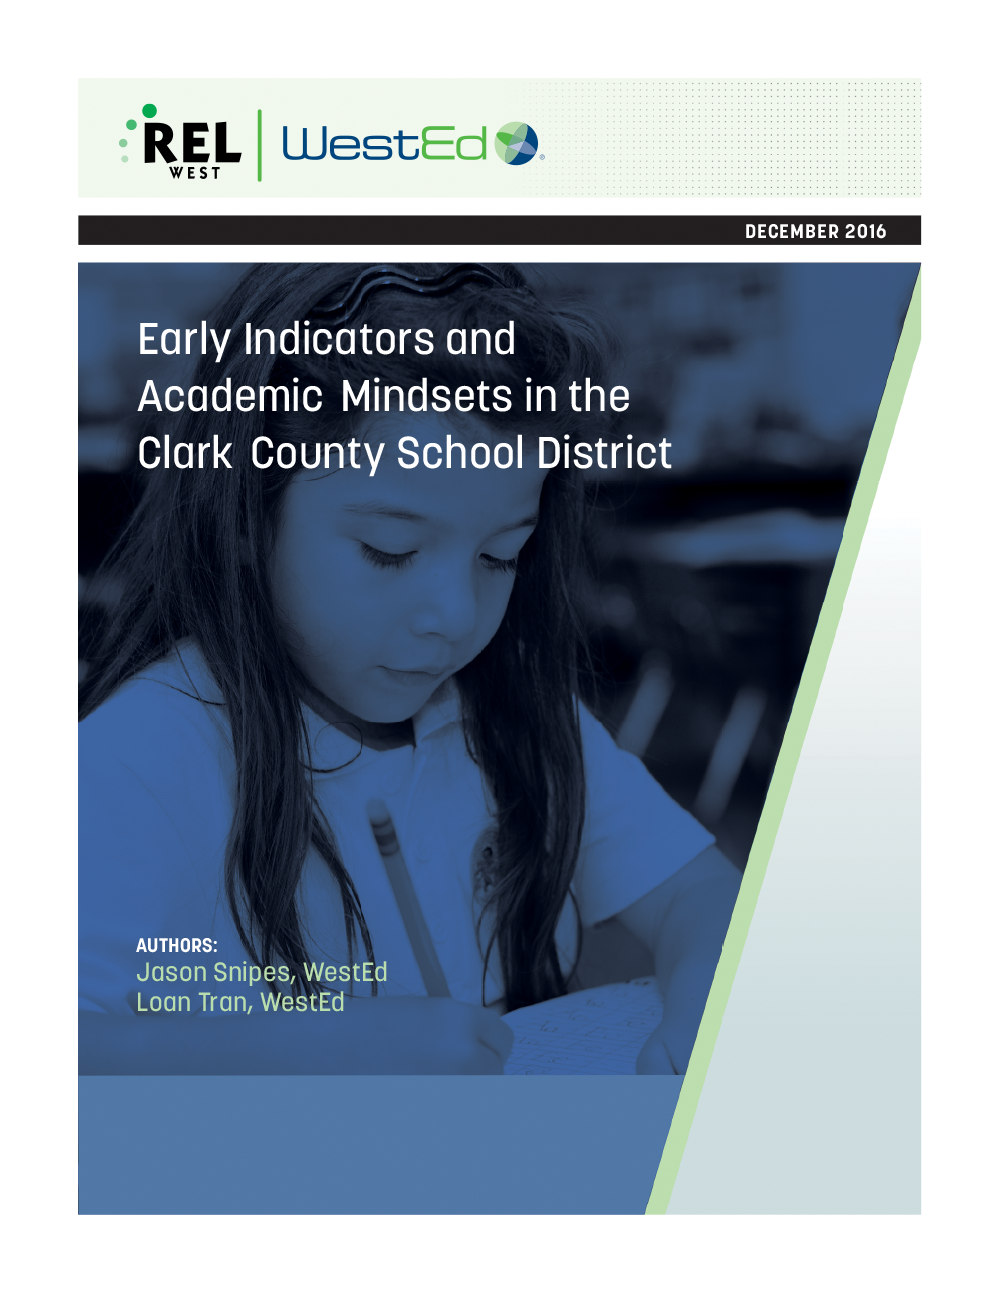 Early Indicators and Academic Mindsets in the Clark County School District